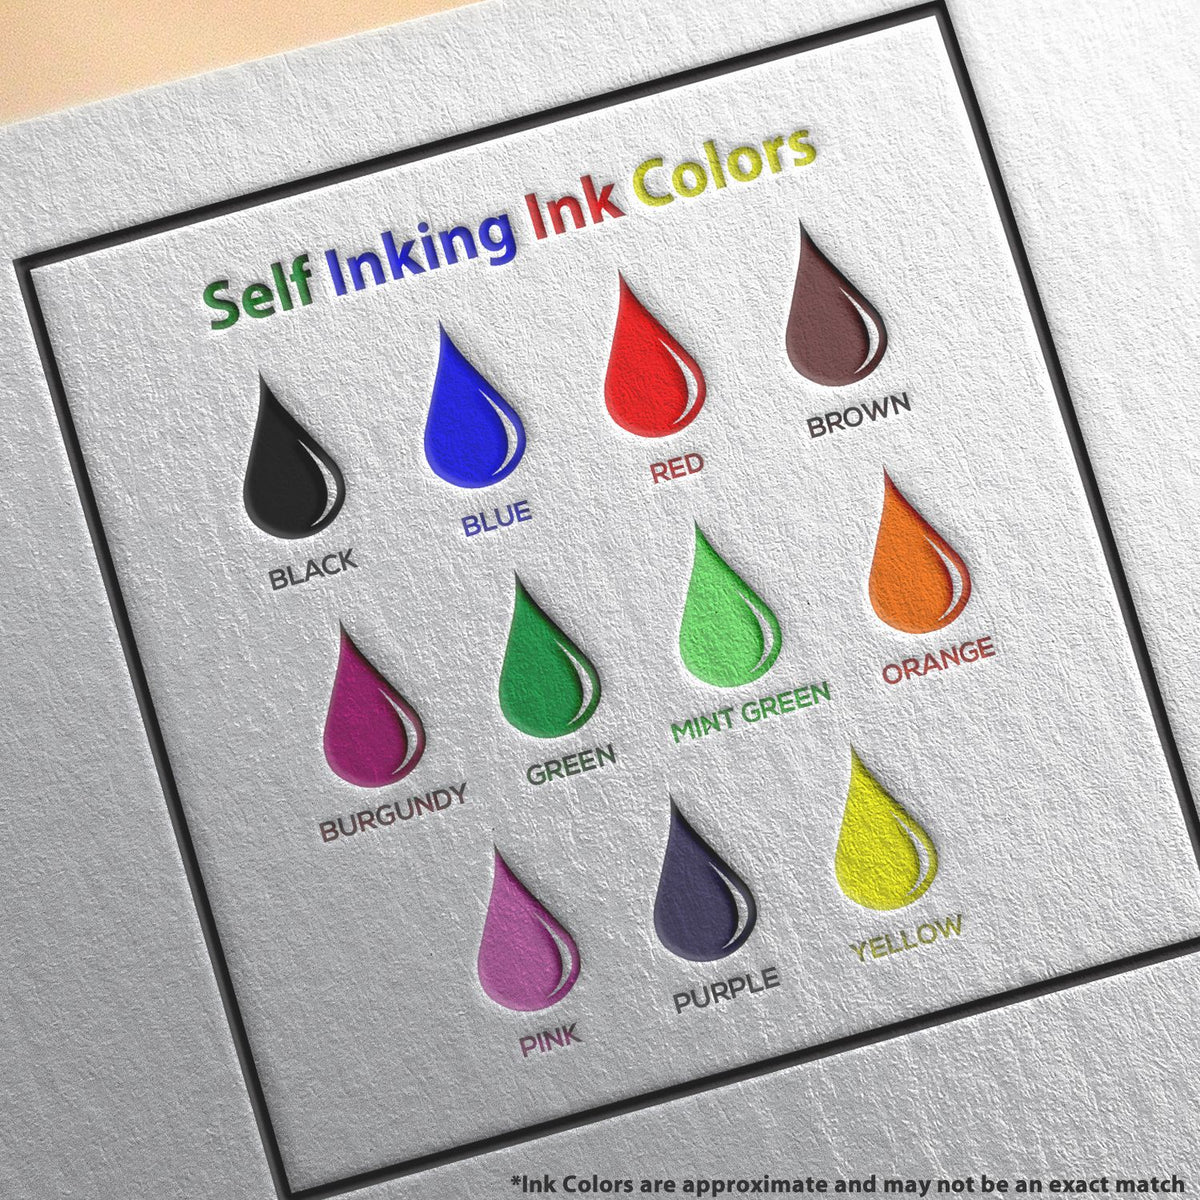 A picture showing the different ink colors or hues available for the Self-Inking Rectangular Washington Notary Stamp product.